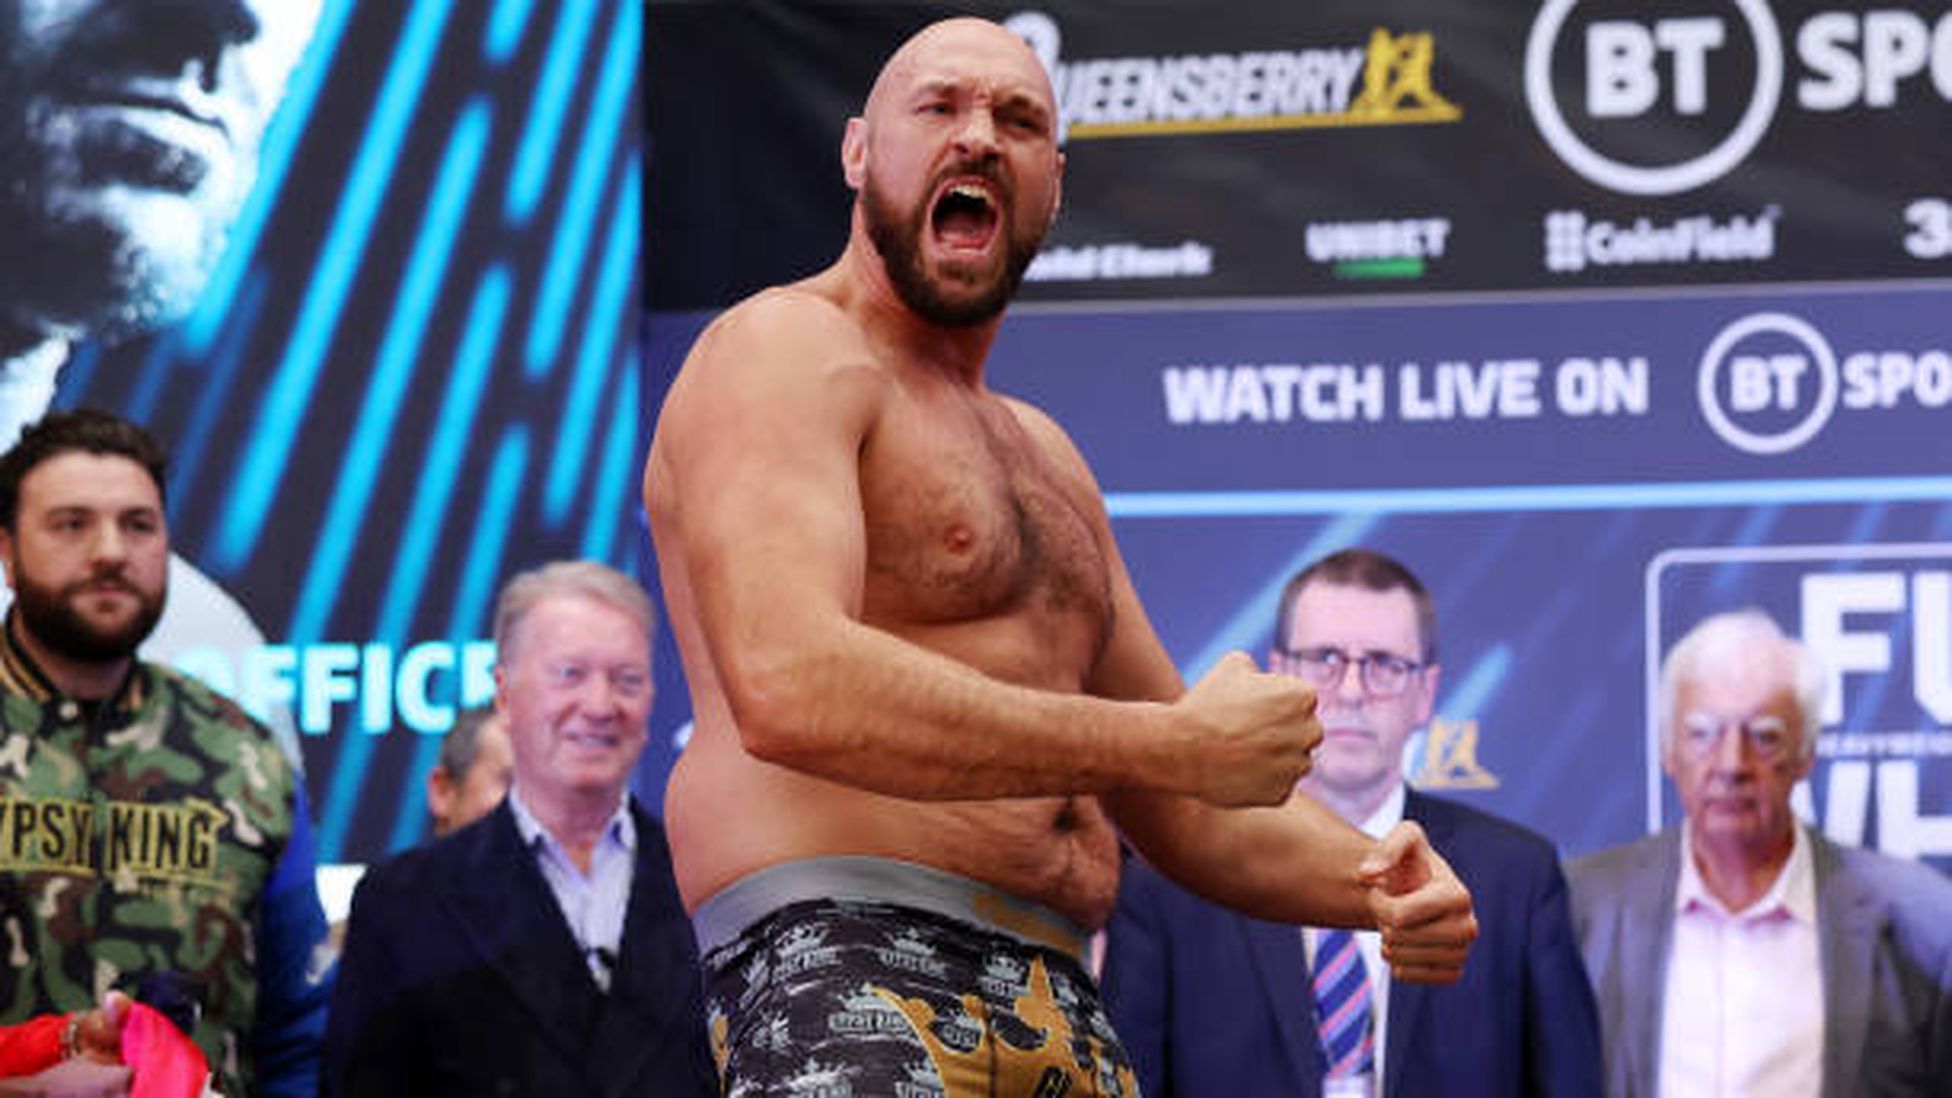 VIDEO: Tyson Fury sparring with &quot;Usyk&quot;